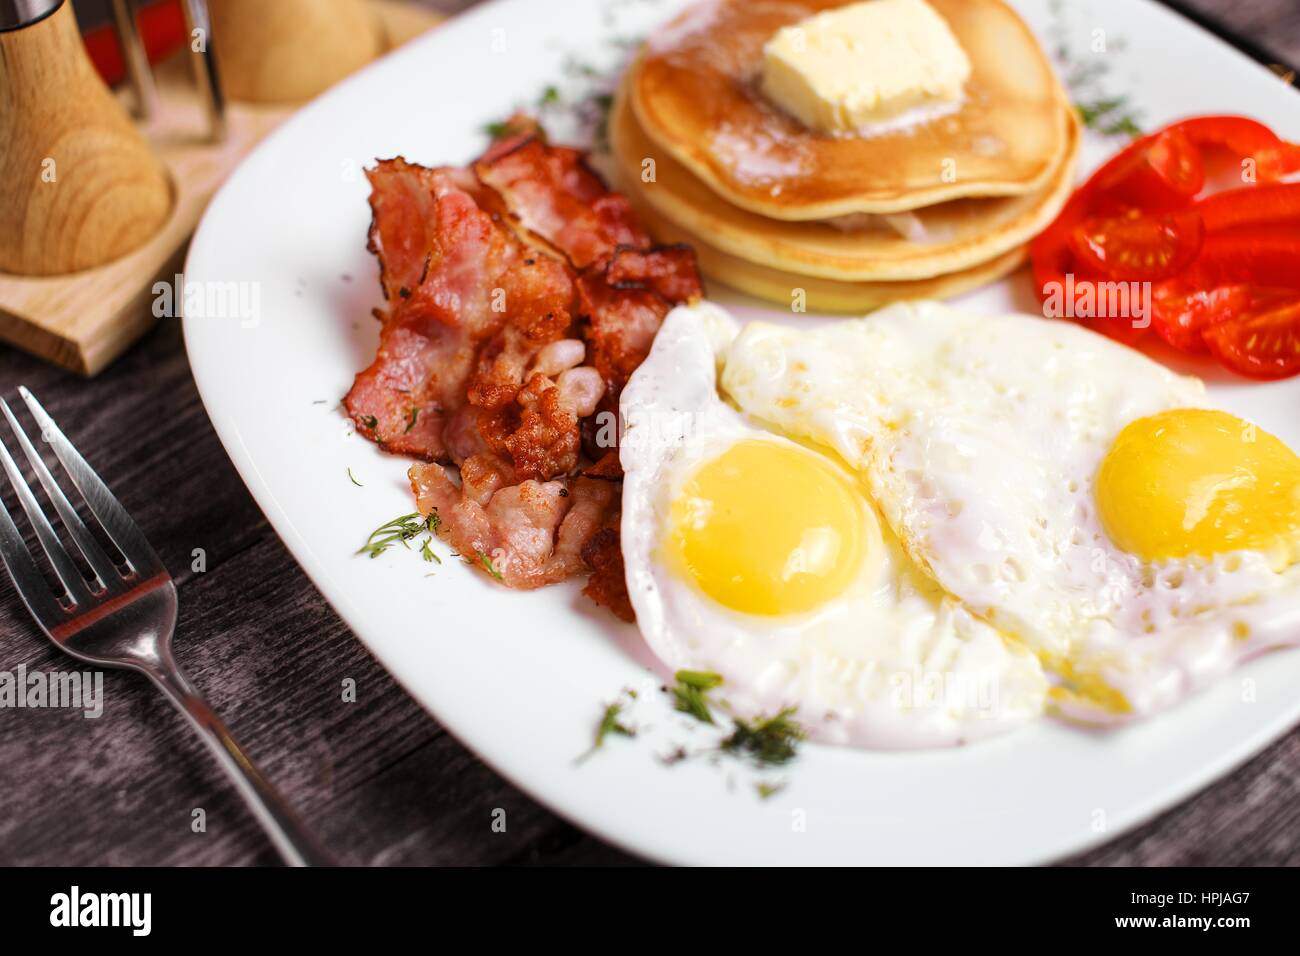 Tasty breakfast with fried eggs, pancakes, bacon and vegetables. Stock Photo